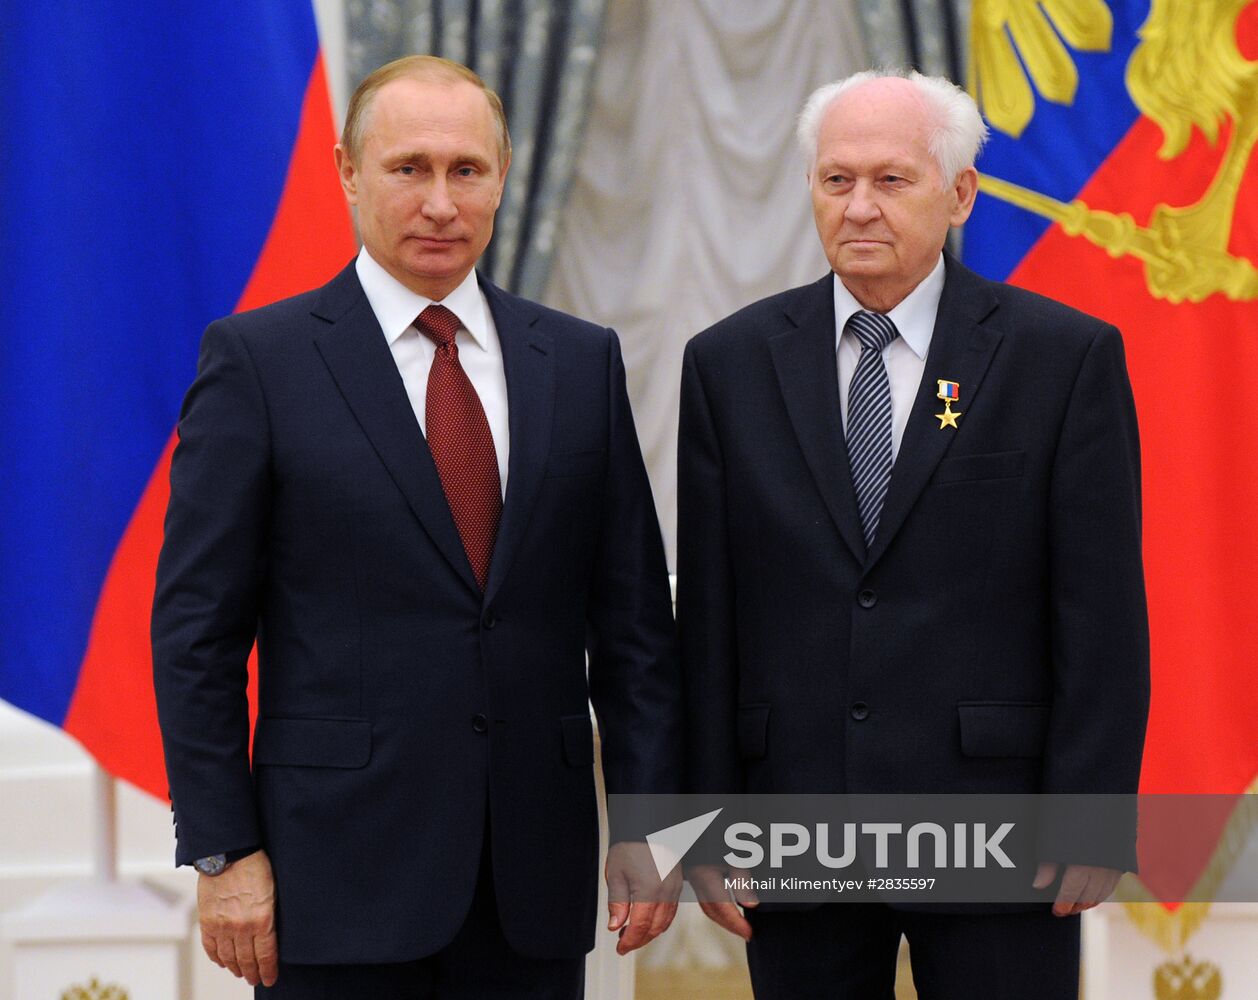 Vladimir Putin presents Hero of Labor of the Russian Federation medals